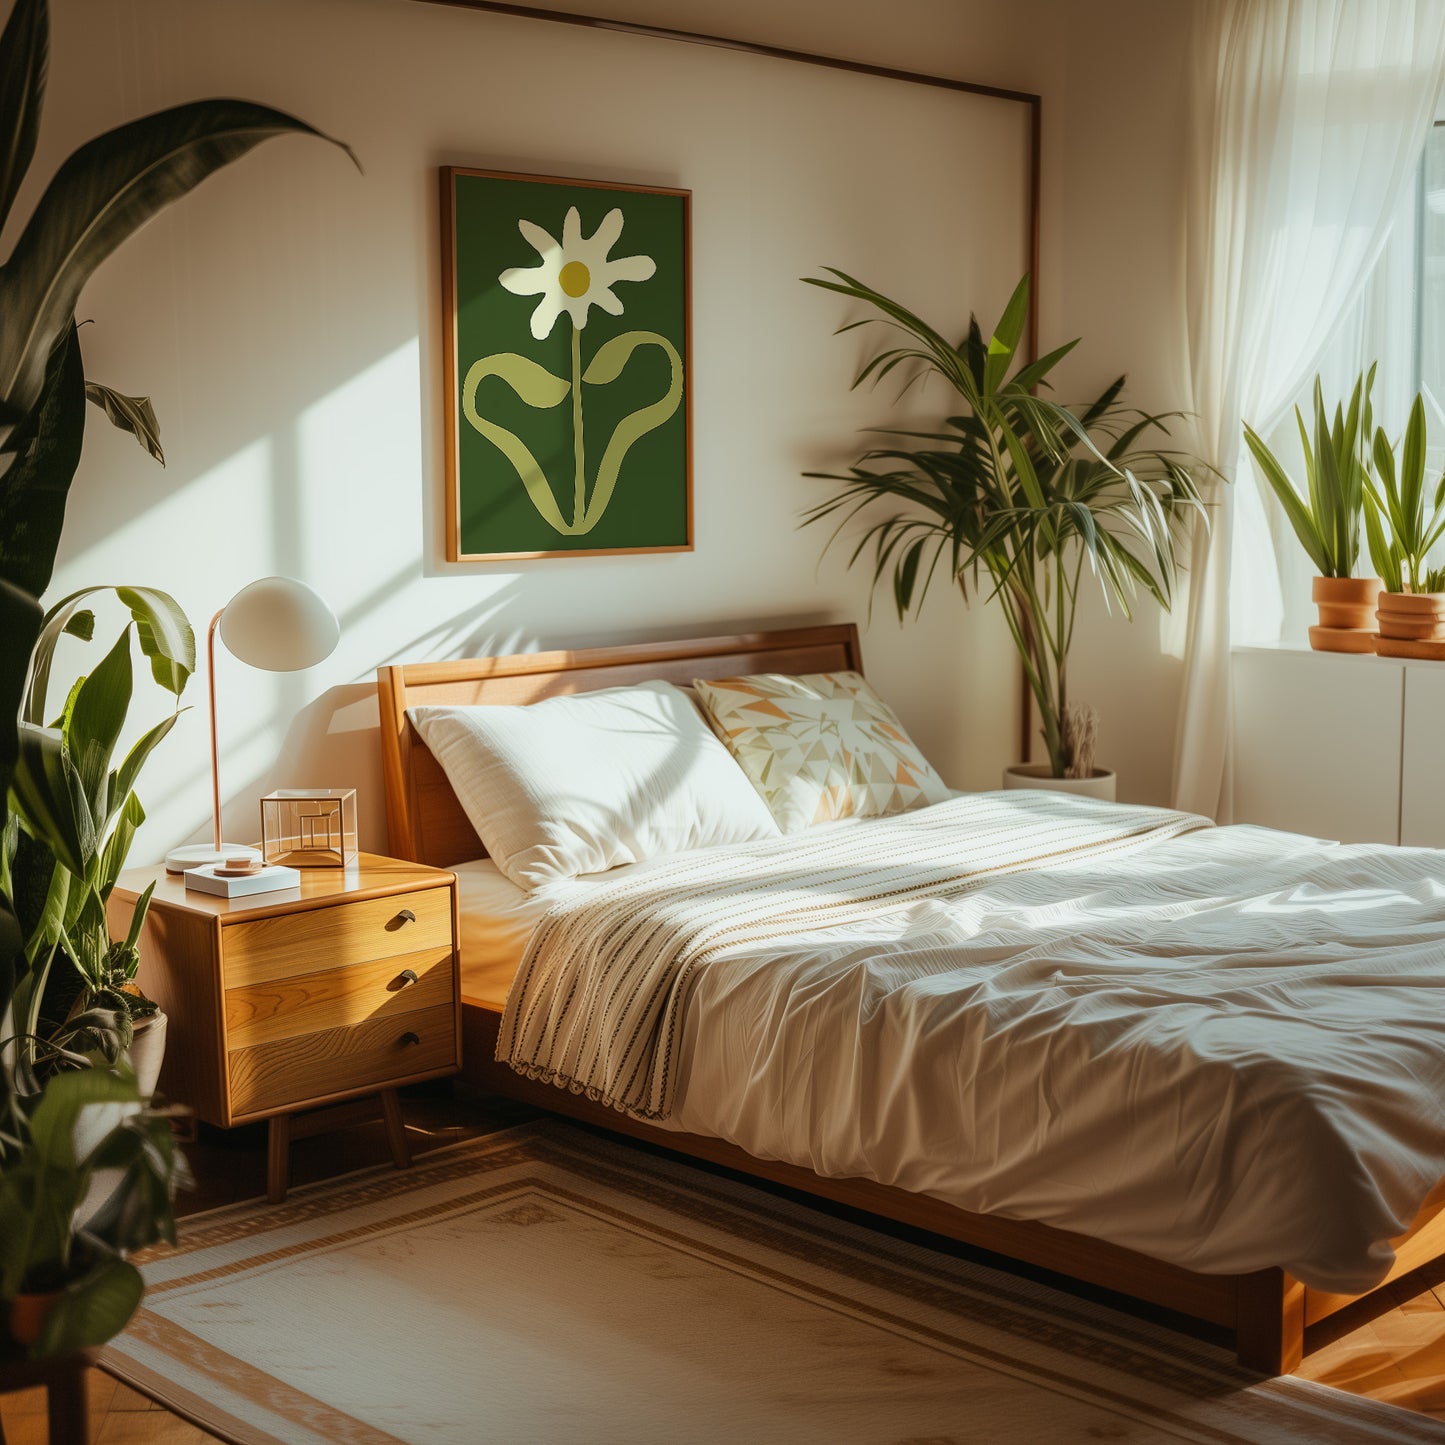 A cozy bedroom with a sunlight, featuring a bed, side table, lamp, plants, and a floral wall art.